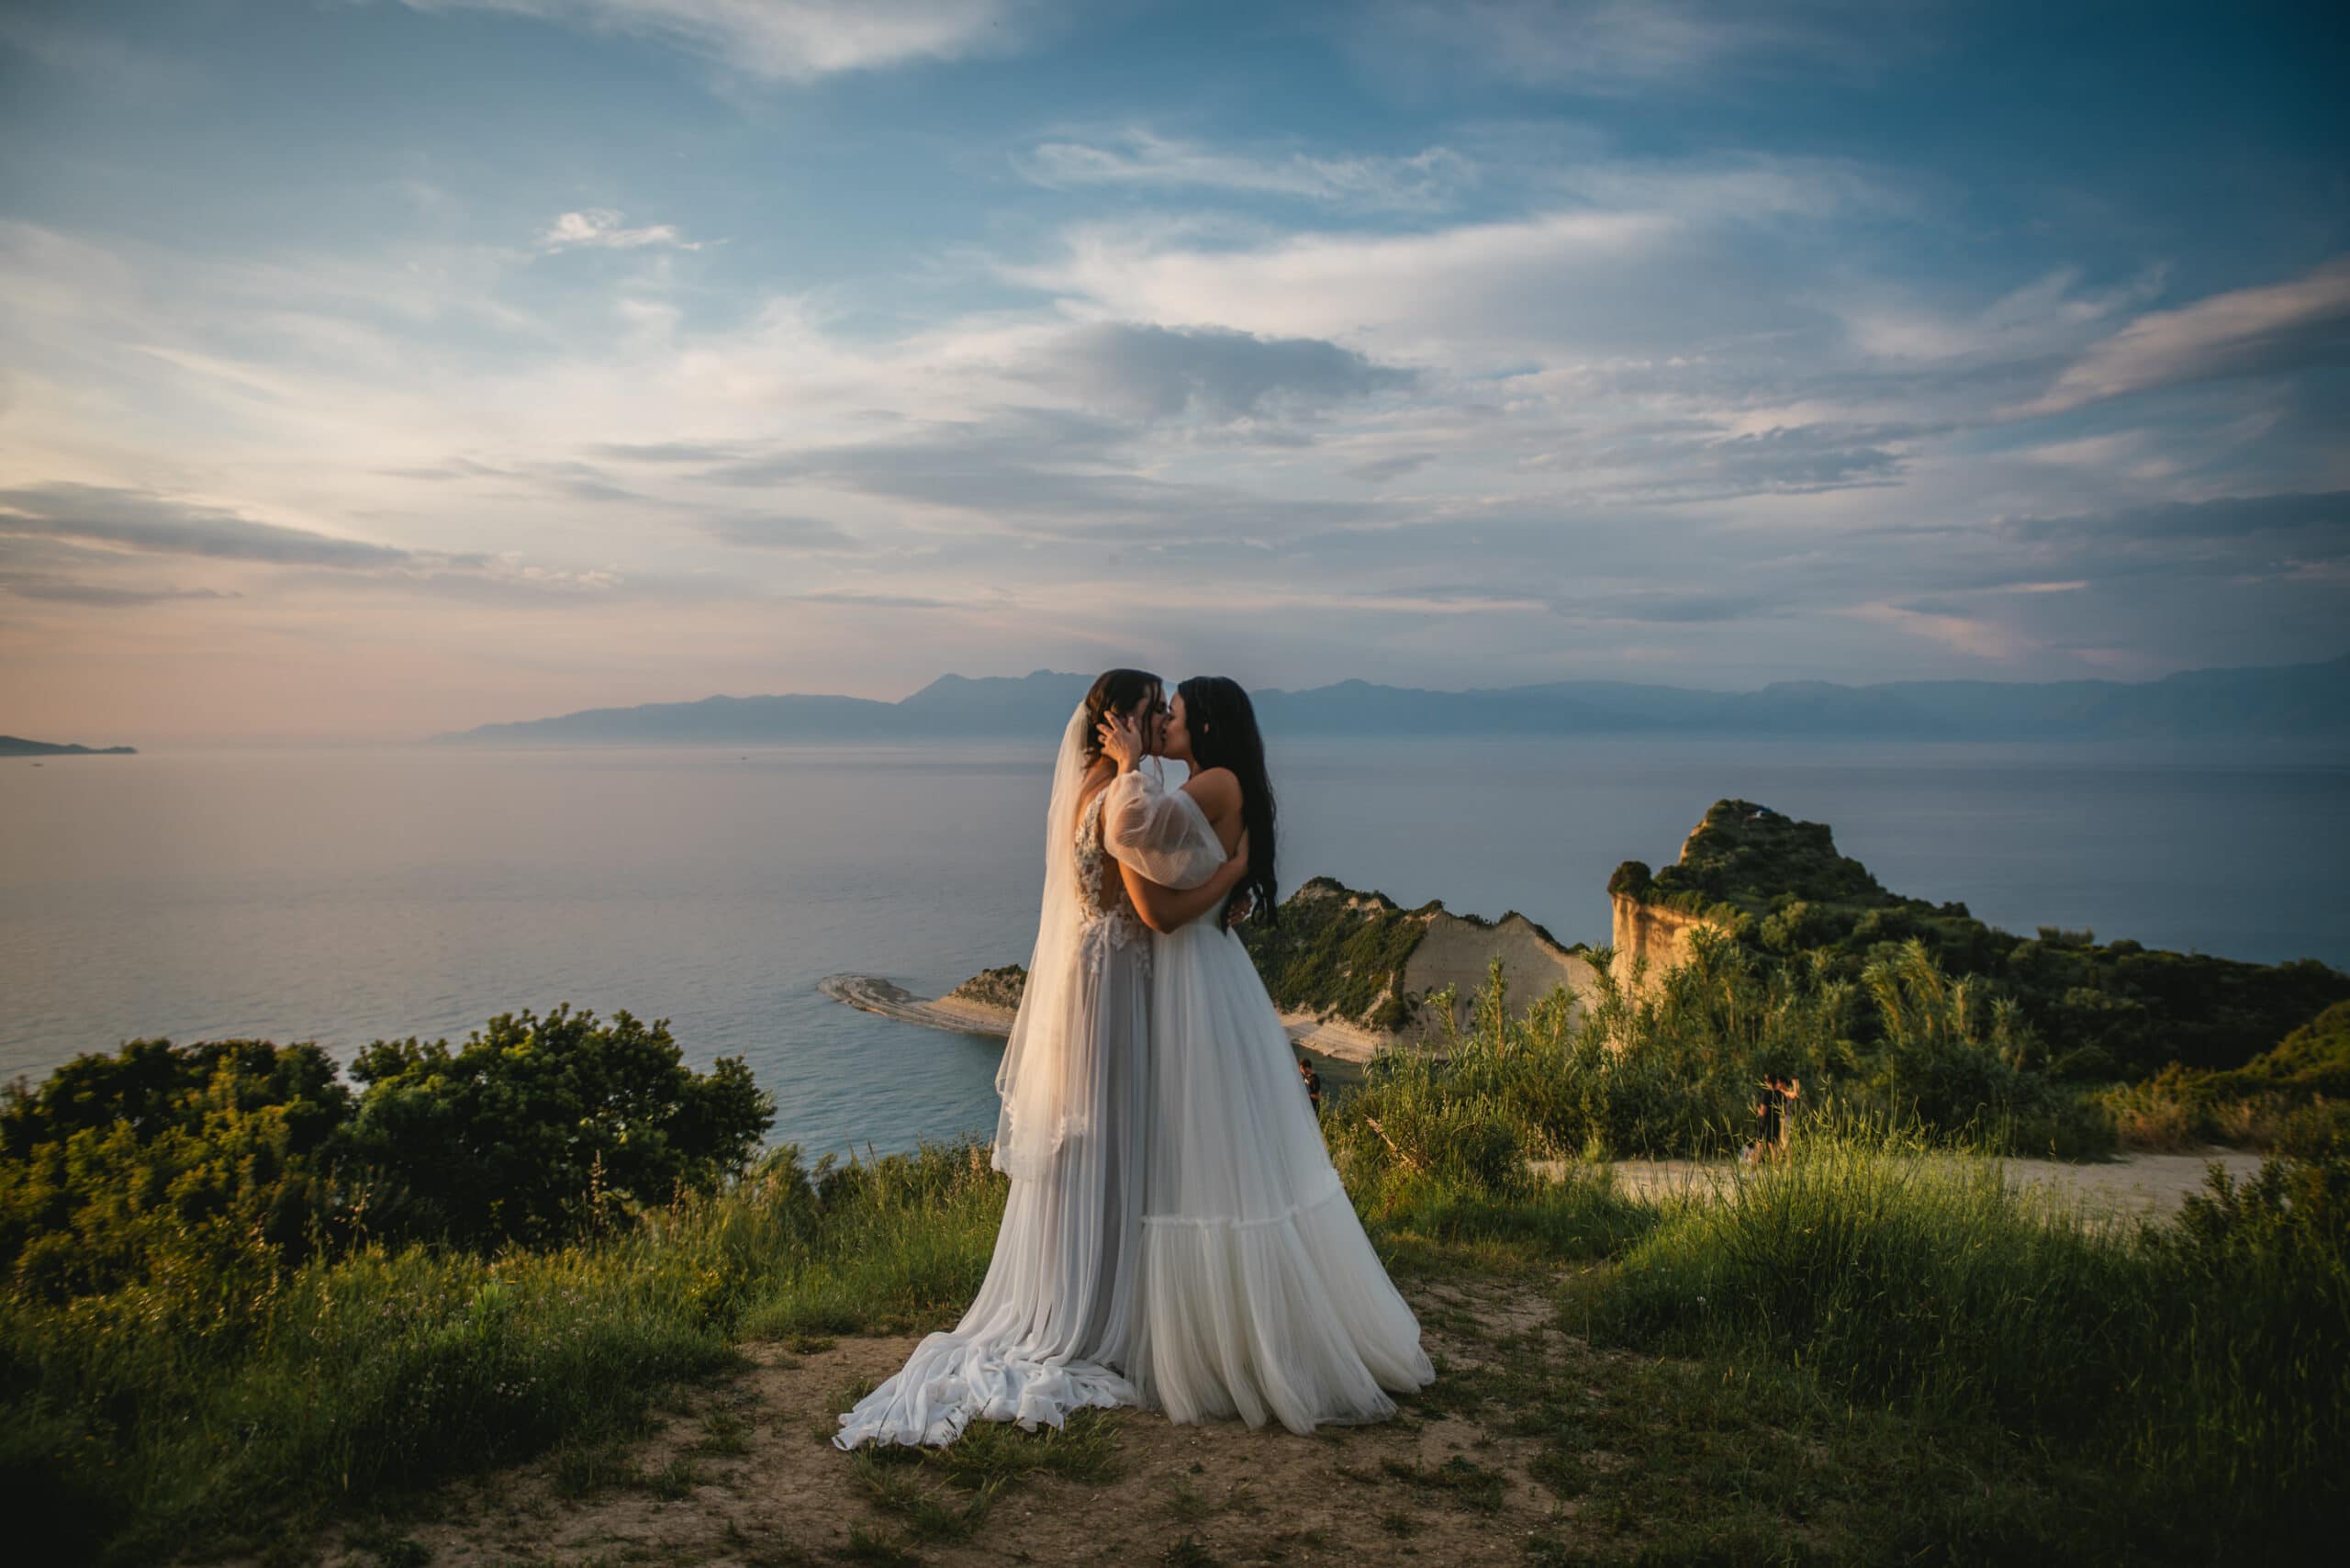 The couple holding hands, surrounded by love in their Corfu elopement.